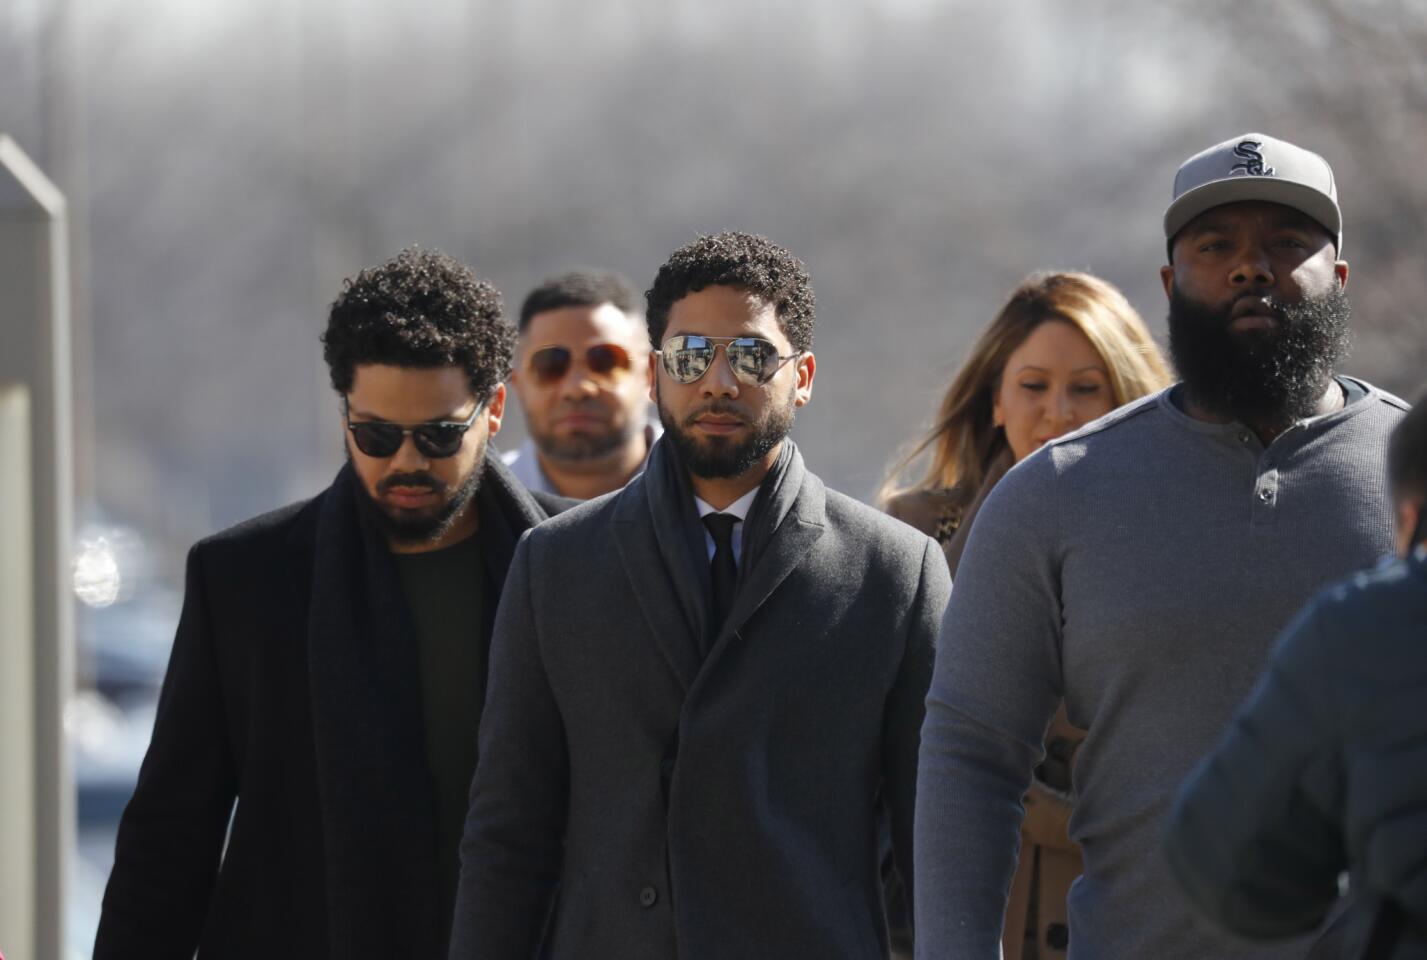 Jussie Smollett enters the Leighton Criminal Court Building, March 12, 2019, for a hearing on whether cameras will be allowed in the courtroom on the criminal charges he faces.